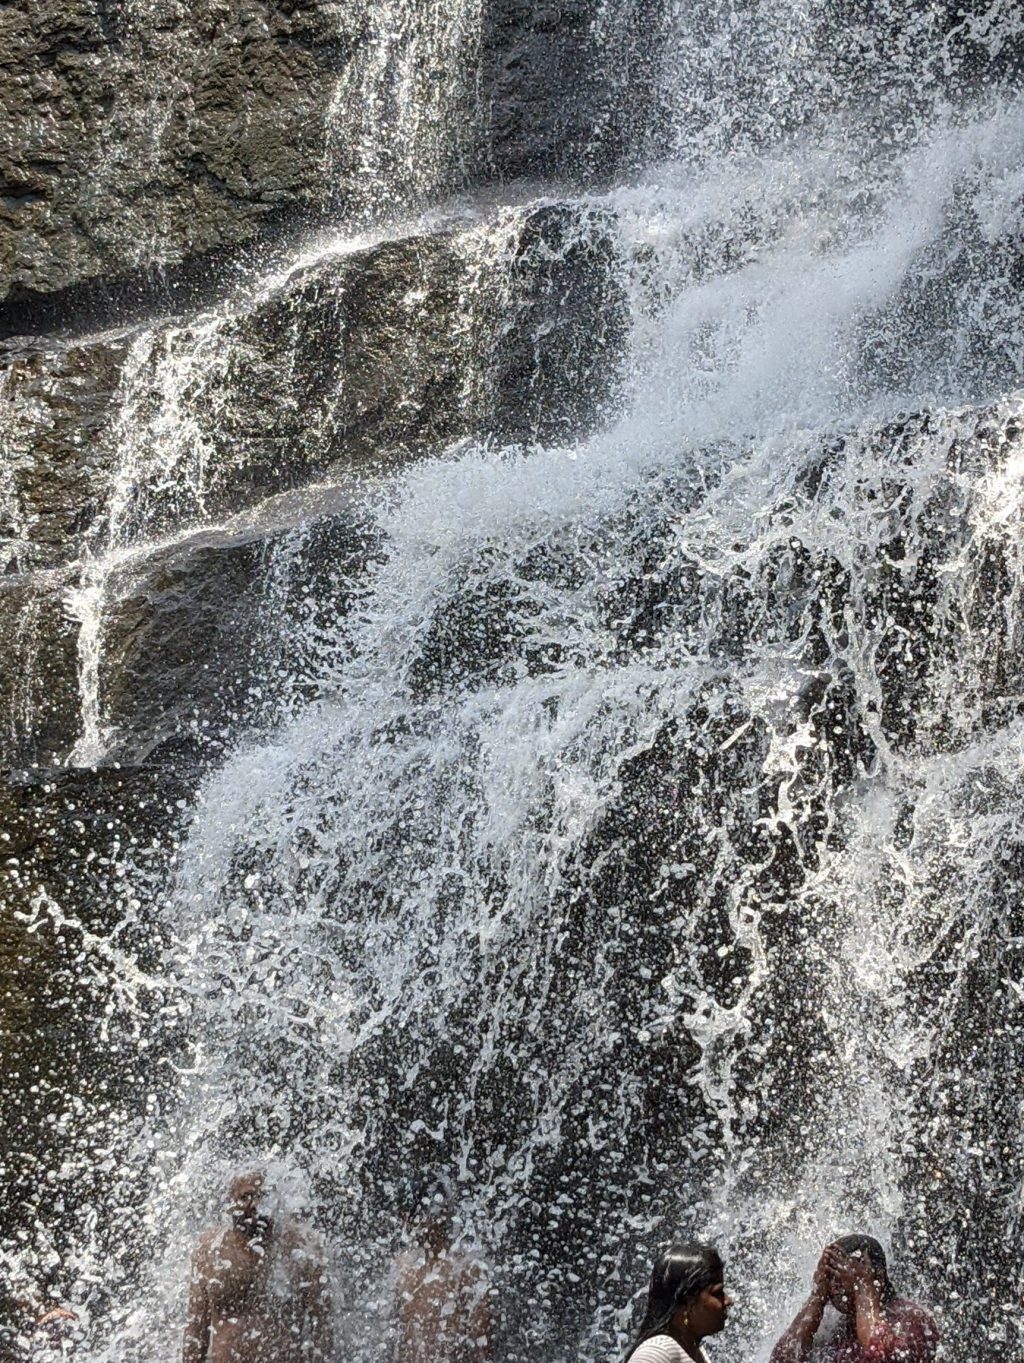 Scintillating chinna Suruli | The falls | Weekend Outing Series